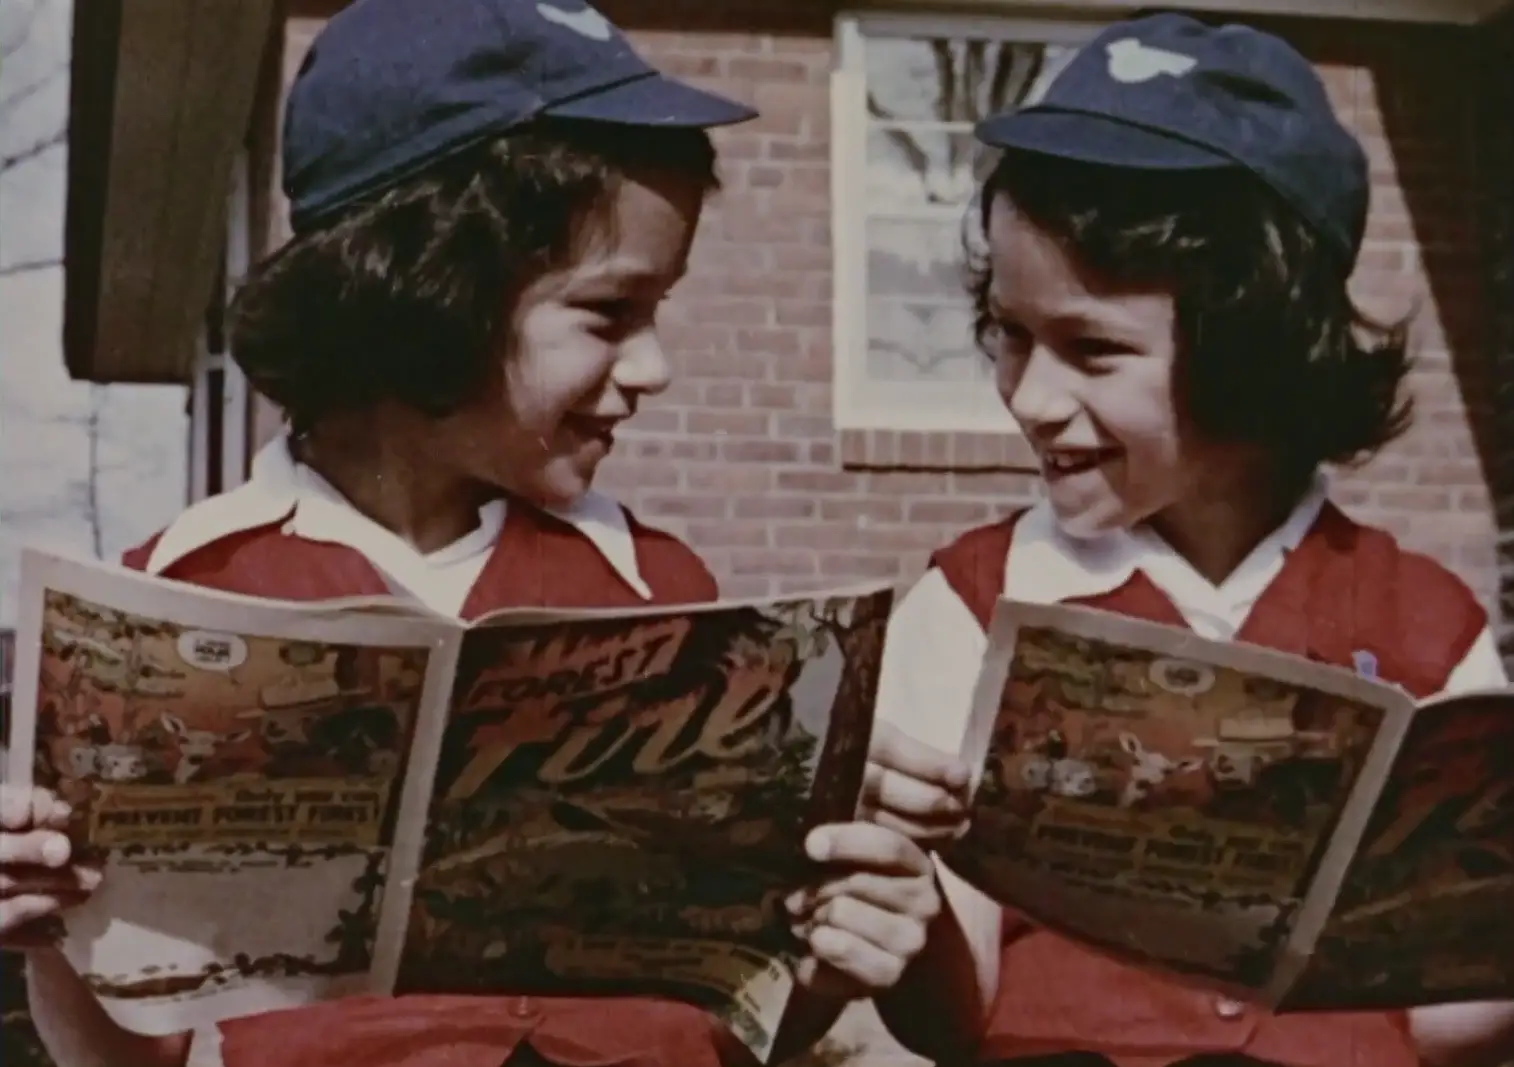 Screen grab from Shadow on the Sea video - two children reading comics